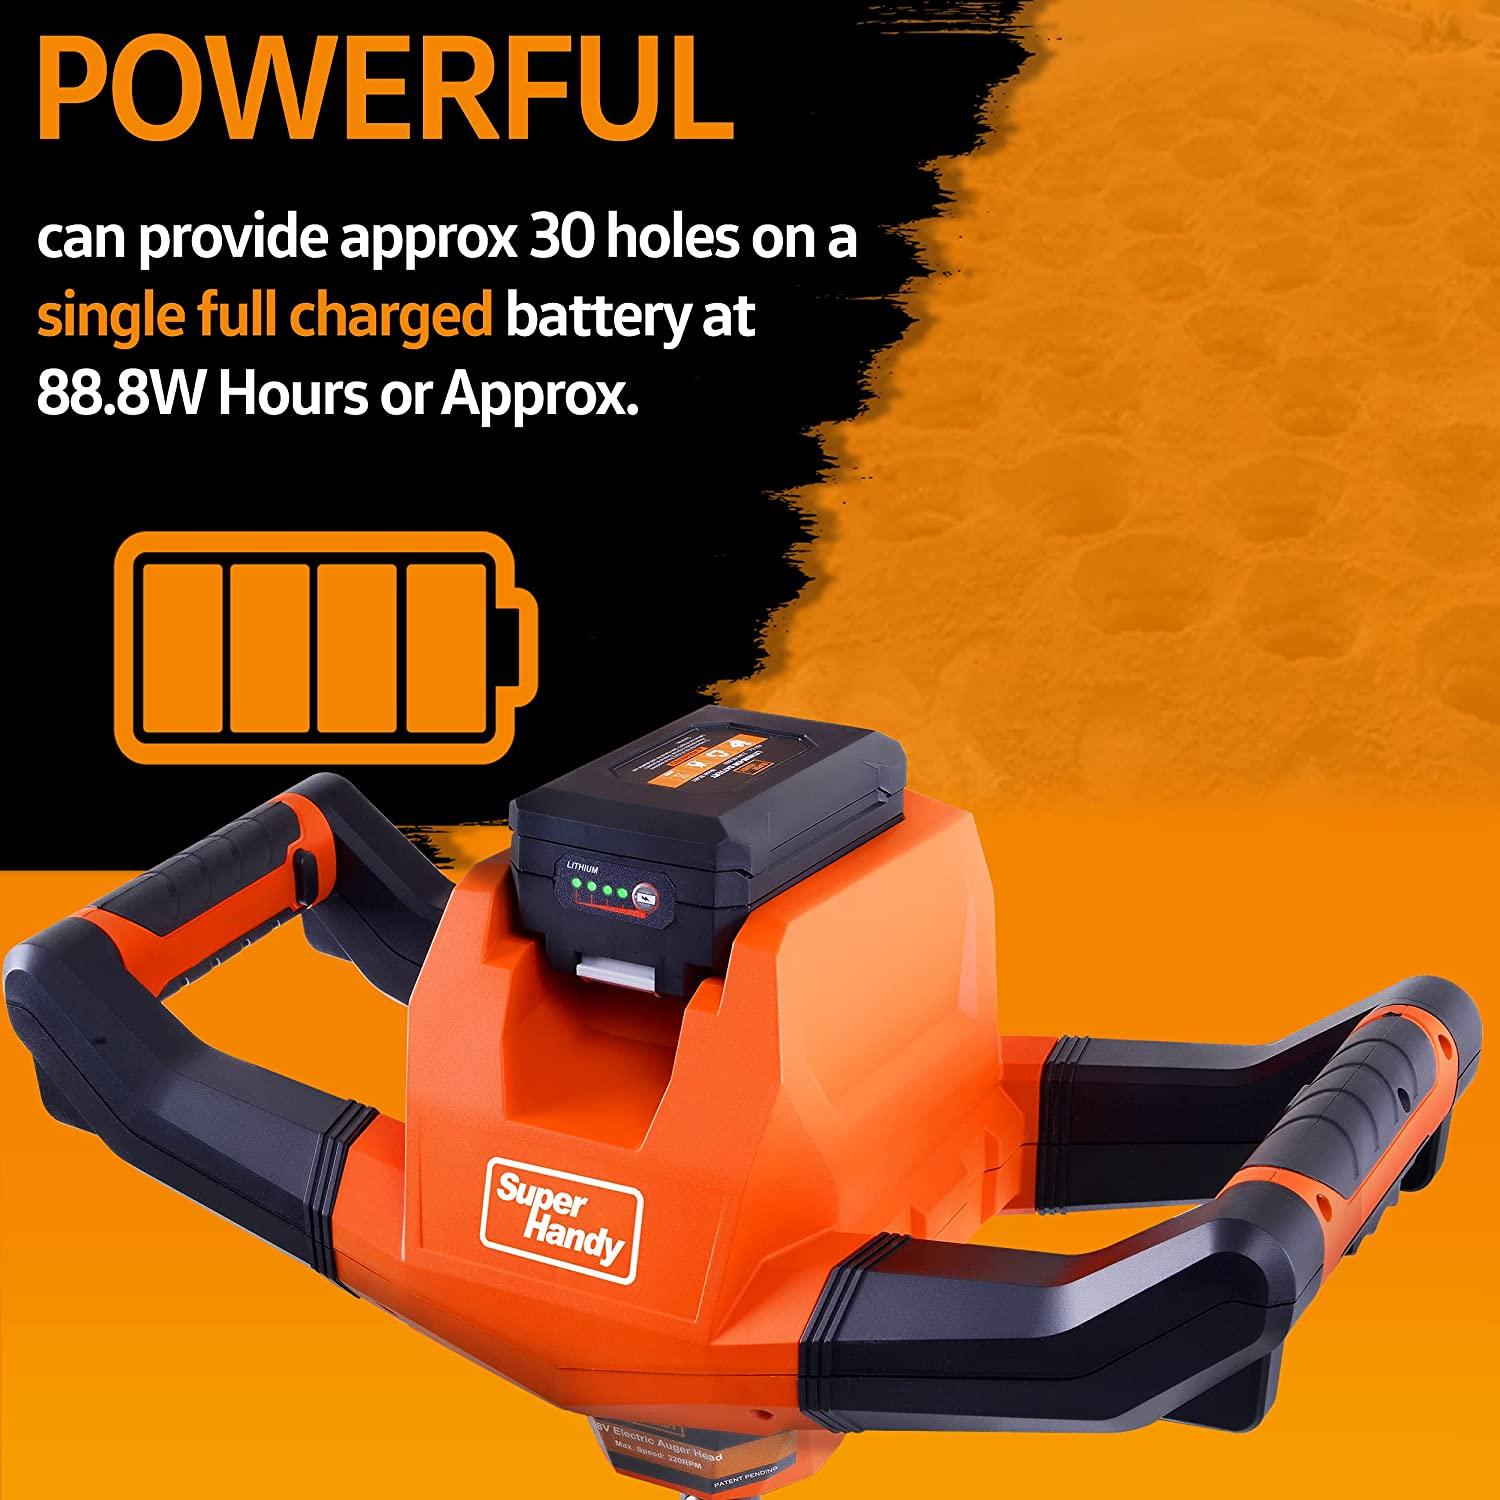 SuperHandy Electric Earth Auger and Drill Bit - 48V 2Ah Battery System